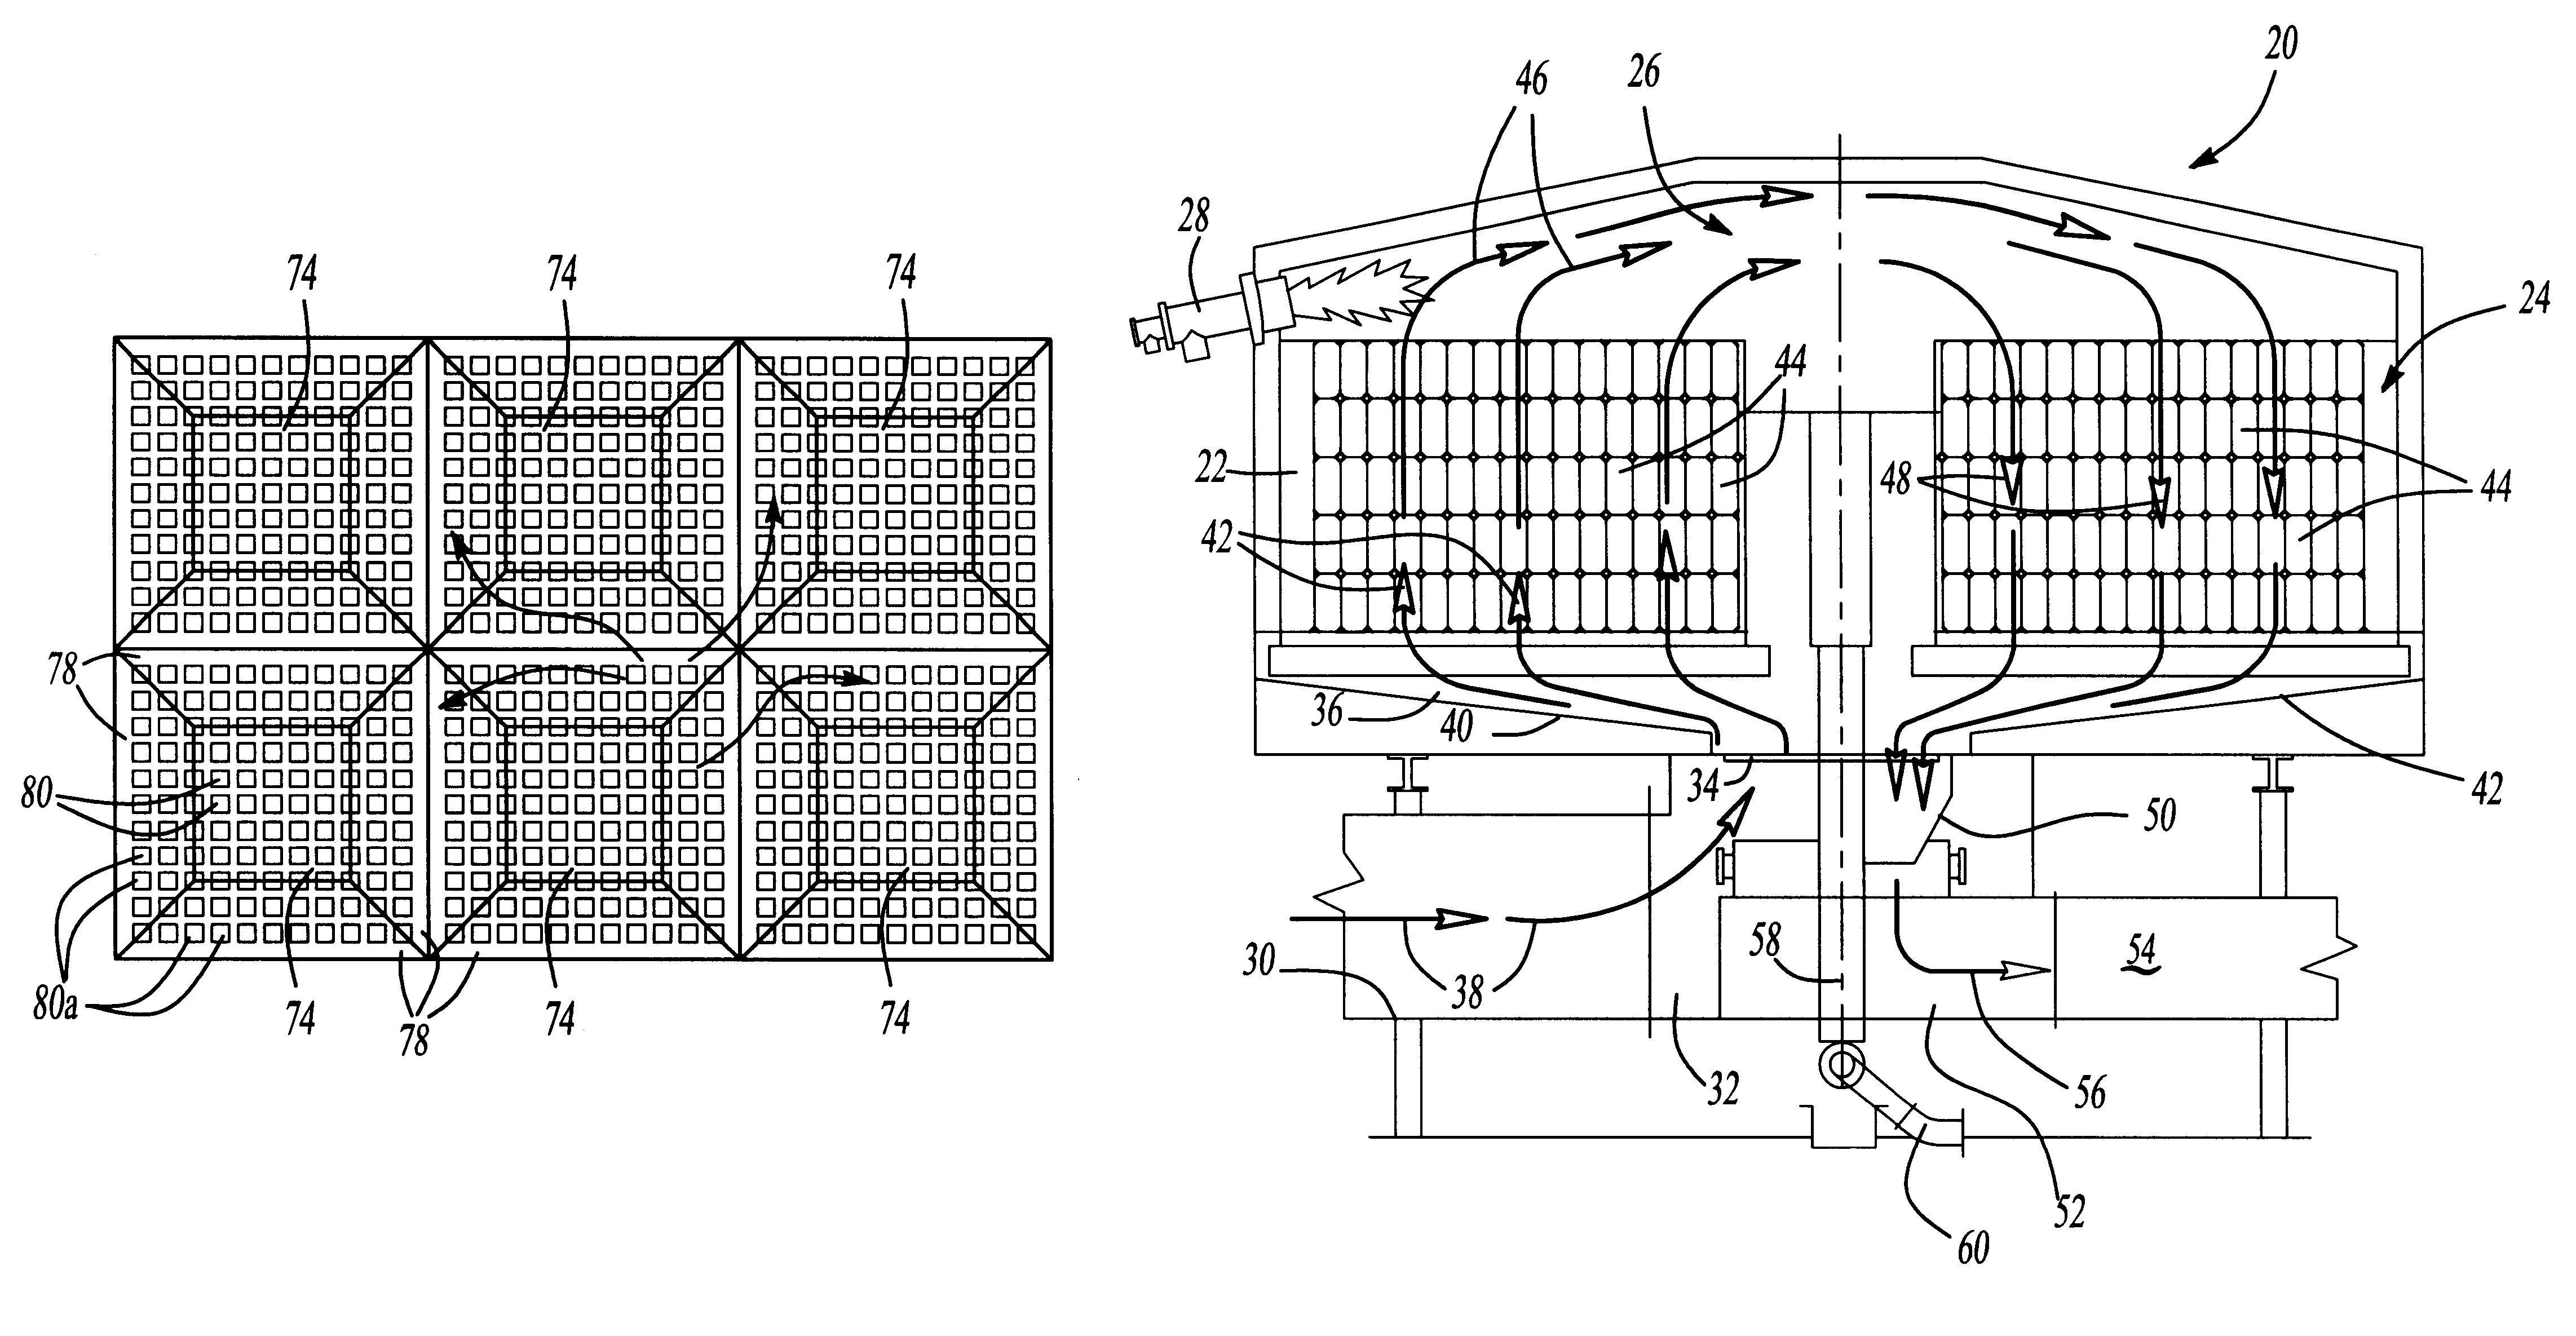 Pollution abatement reactor system having nonprismatic structured media